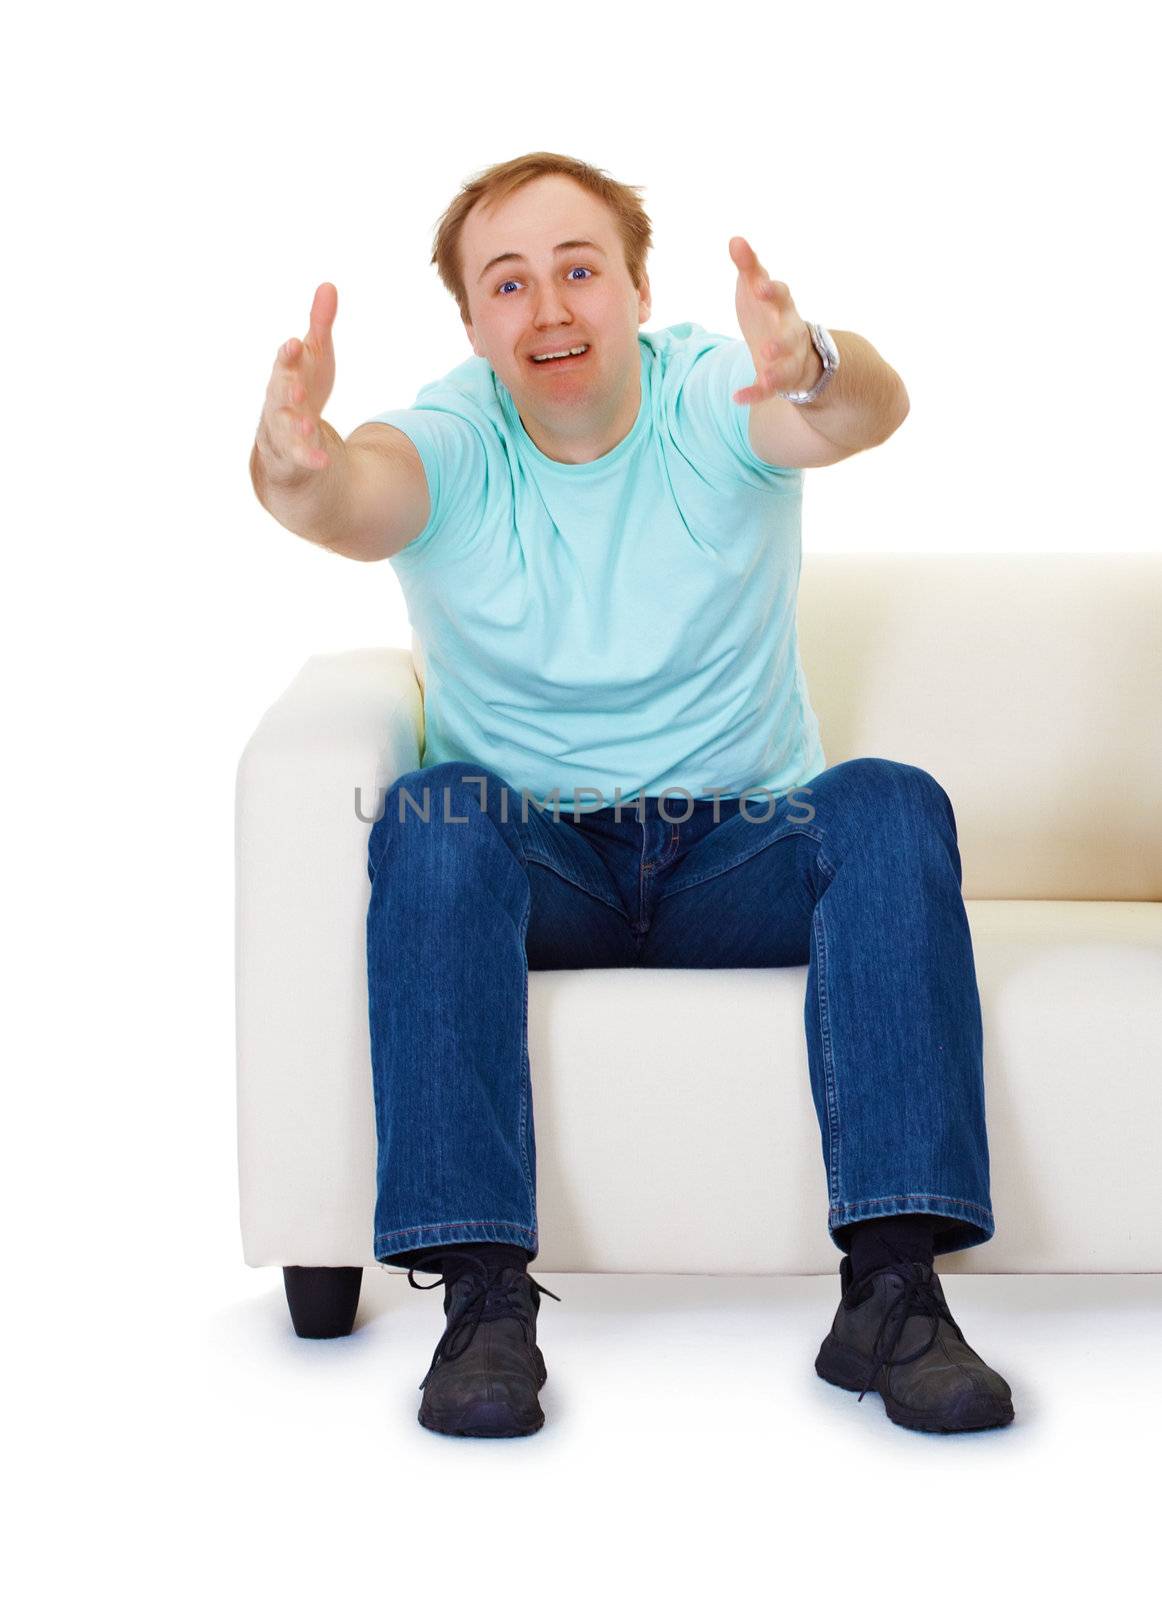 Man sits on couch in despair by pzaxe